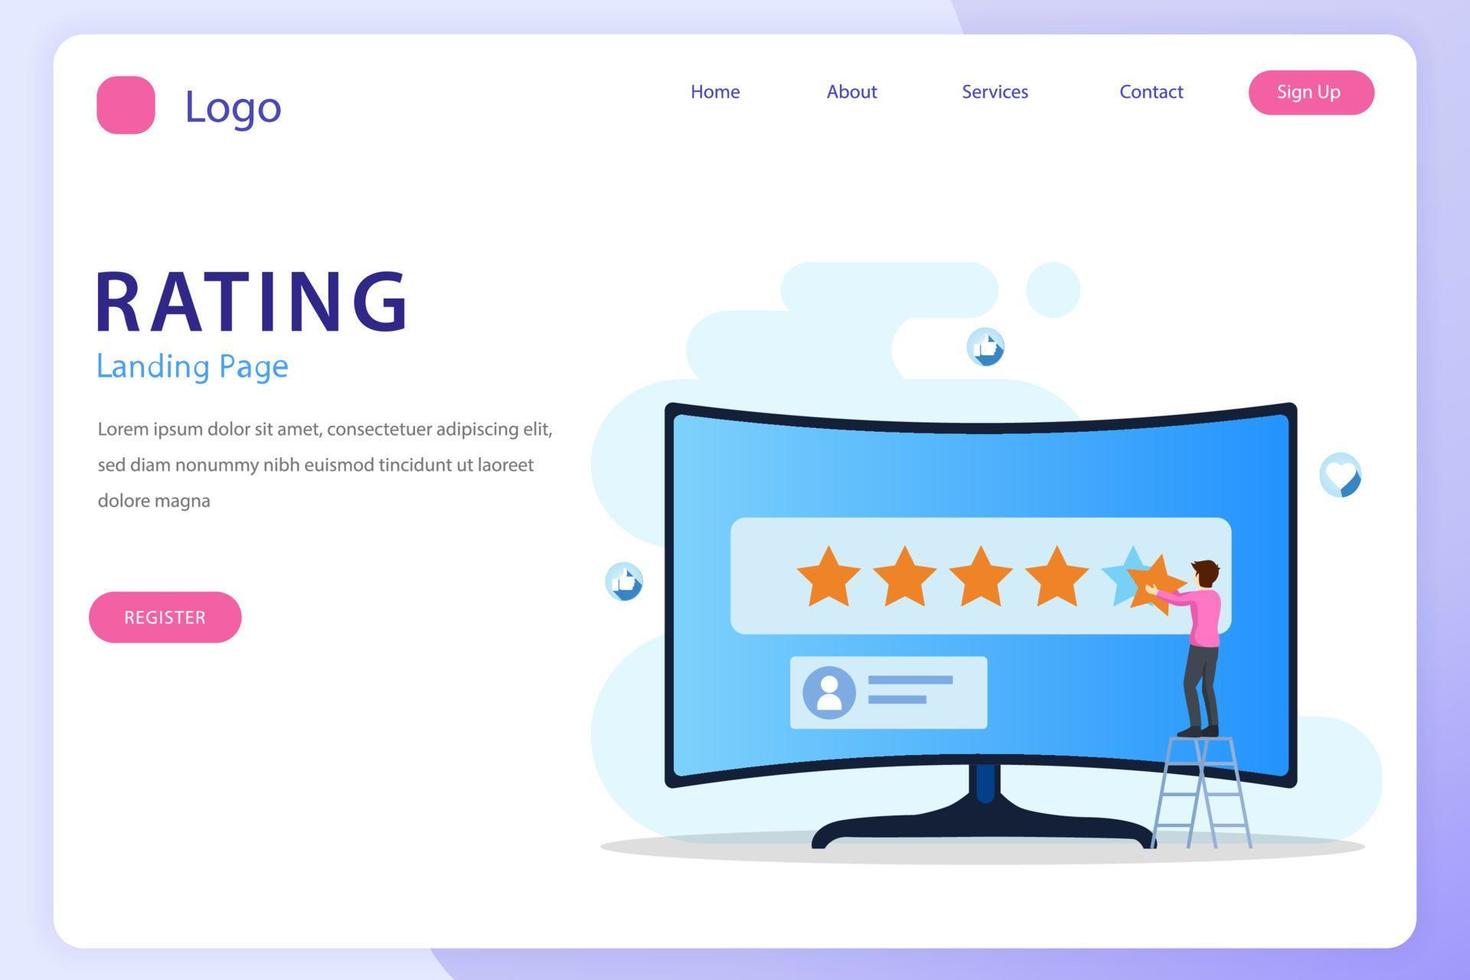 application rating concept, technology, Reviews stars with good and bad rate, customer satisfaction, social media, Flat vector template